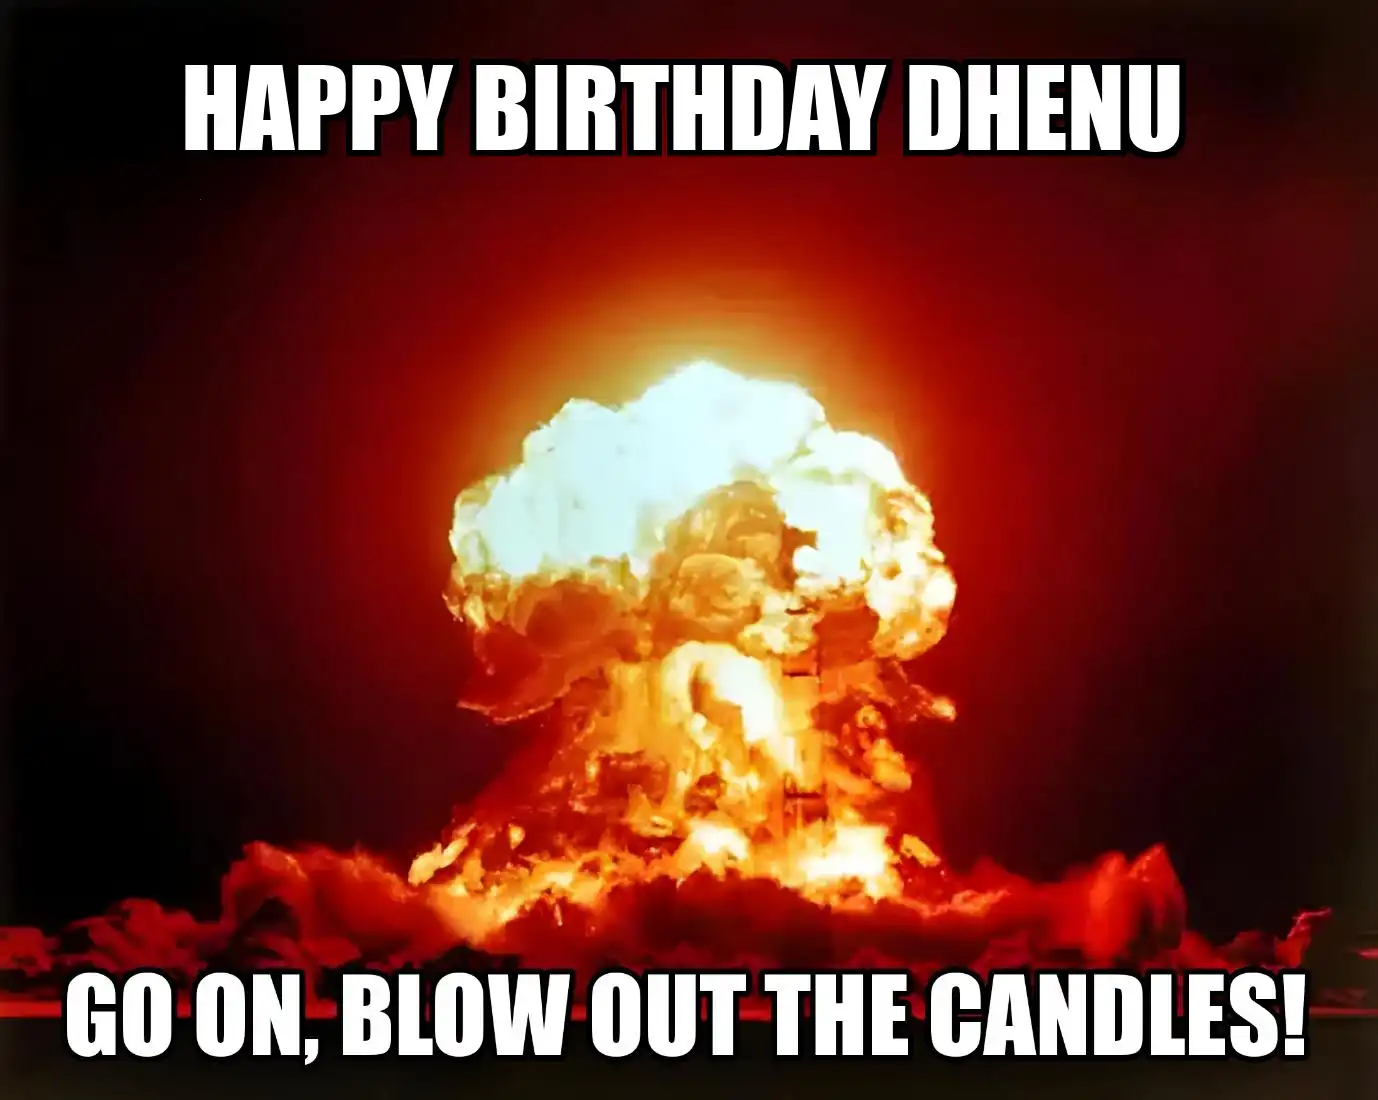 Happy Birthday Dhenu Go On Blow Out The Candles Meme